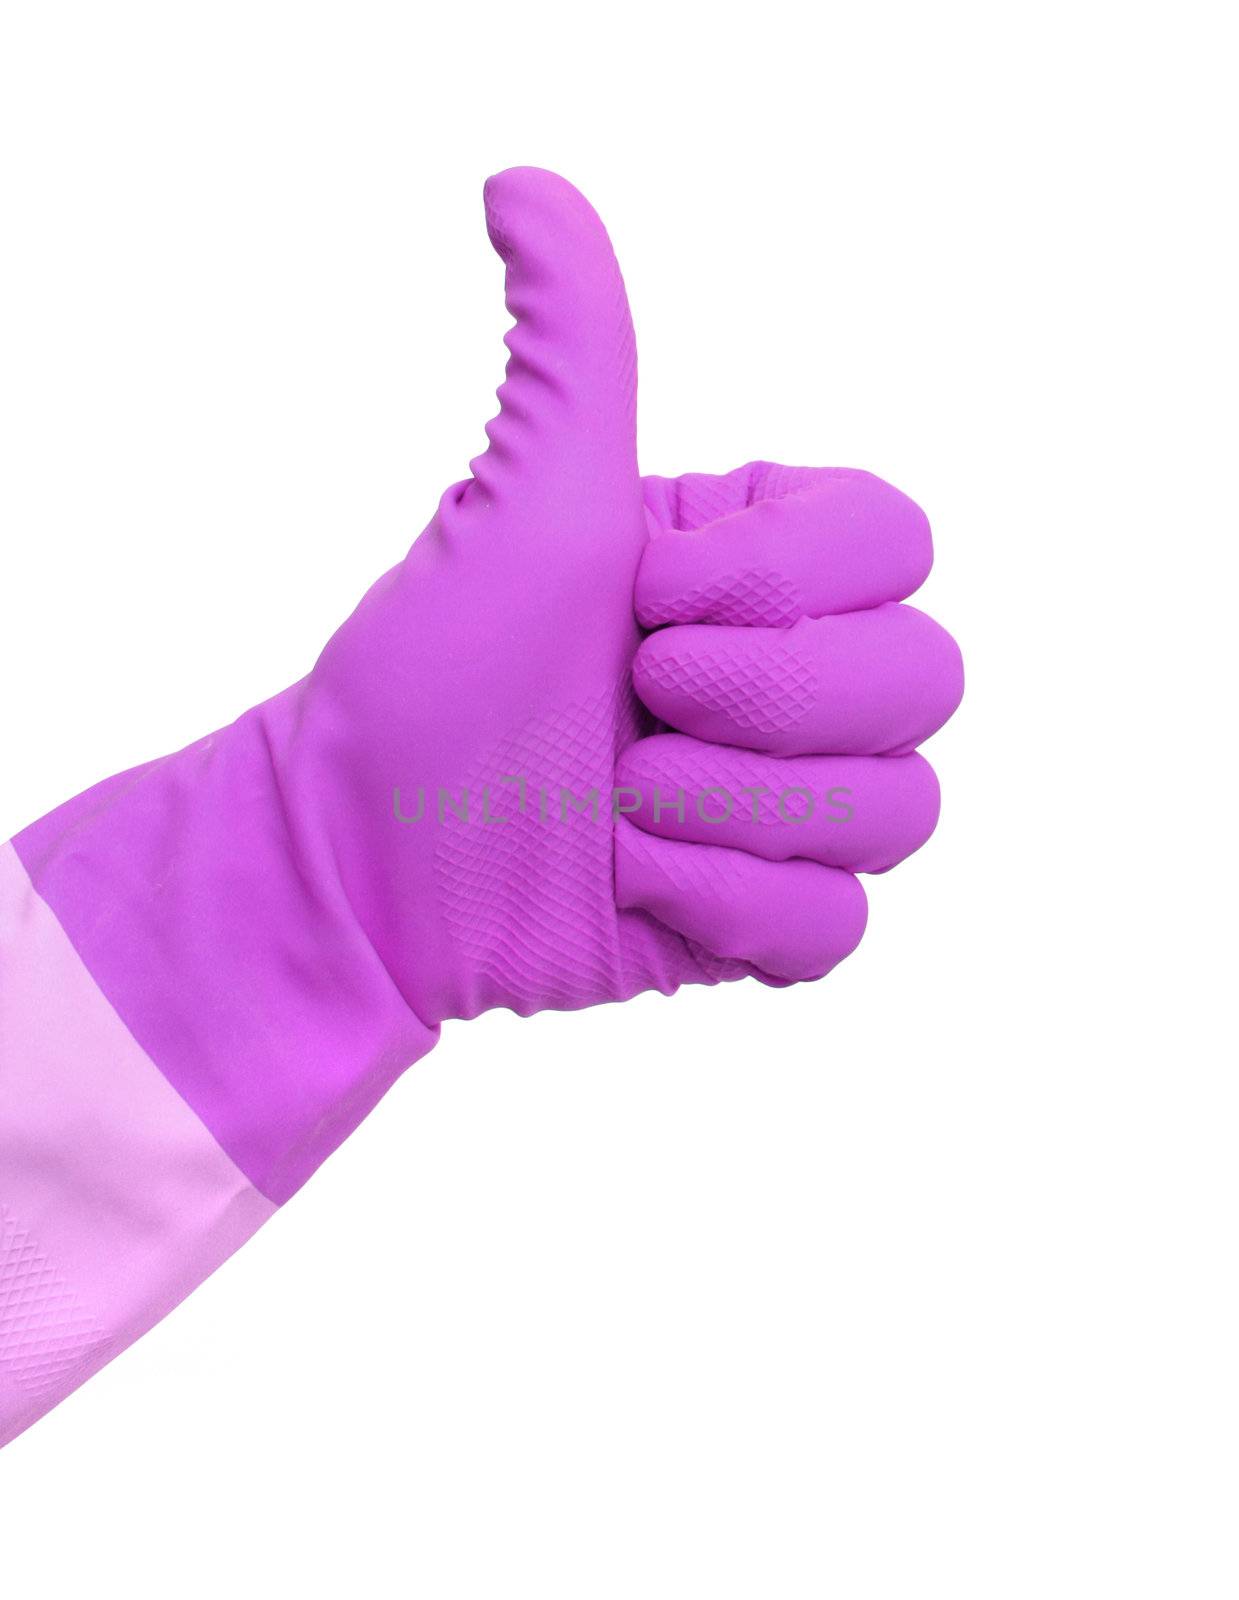 Cleaning thumbs up by leeser